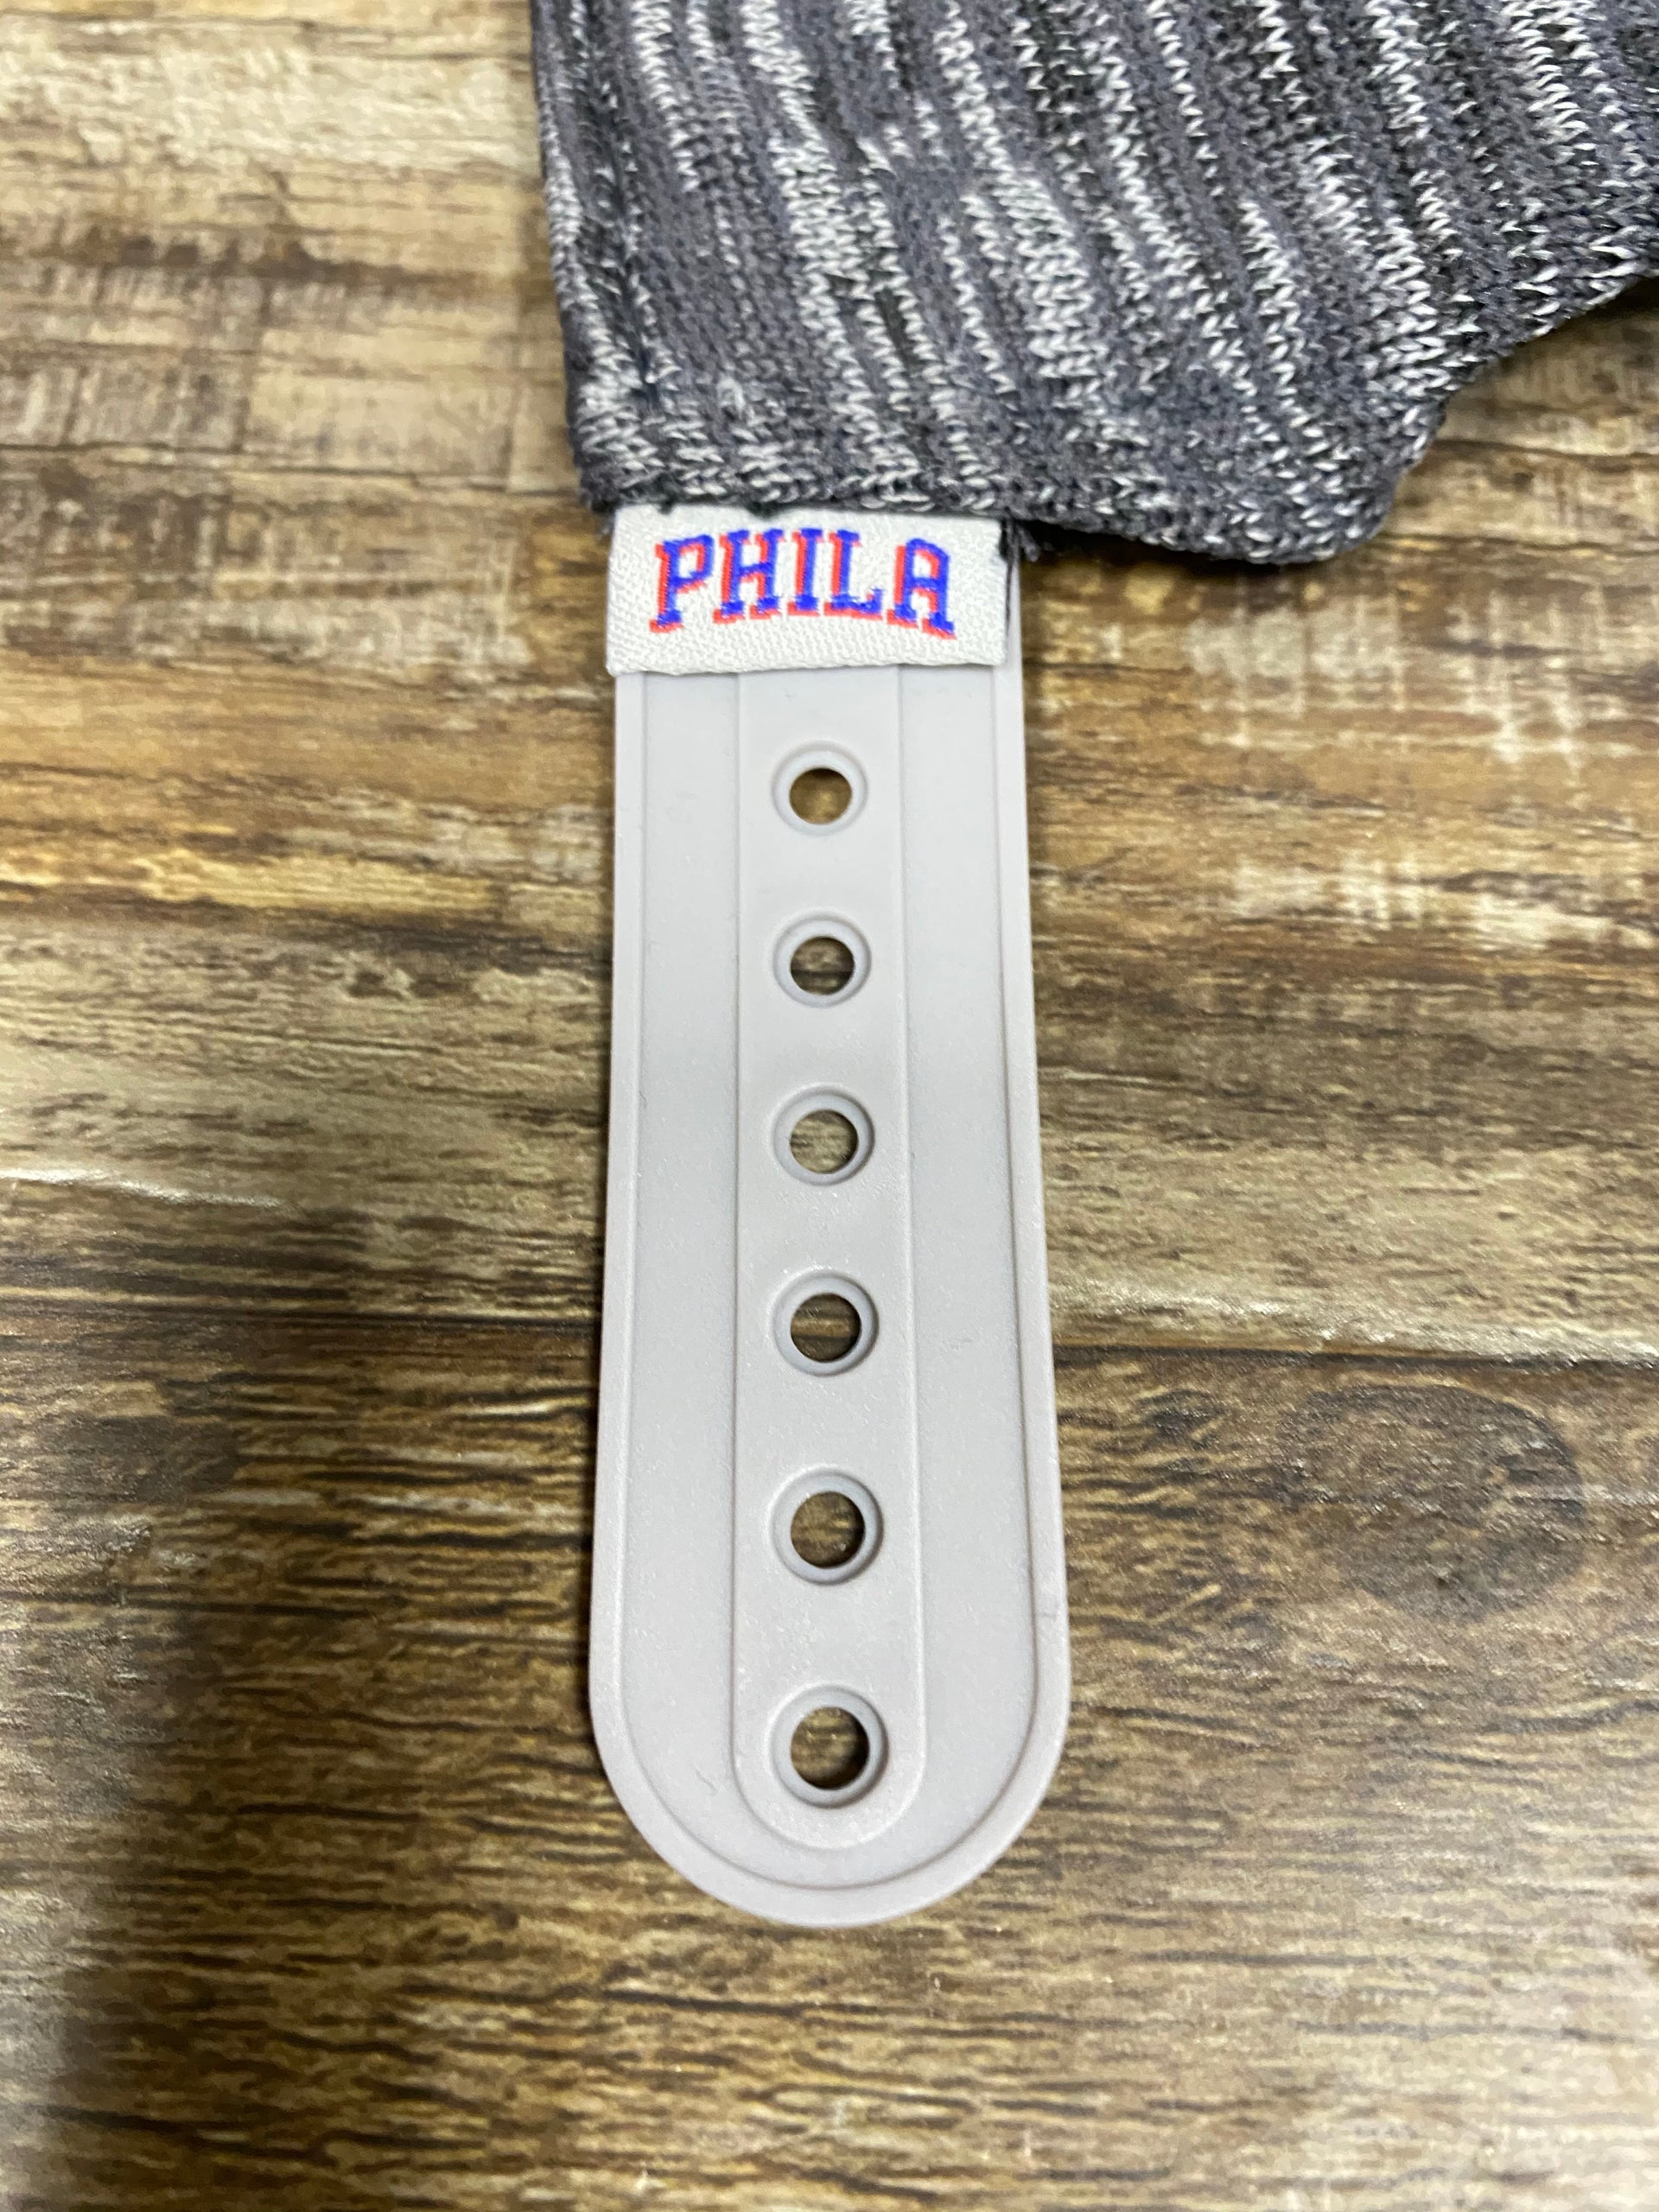 on the strap of the Philadelphia 76ers Flyknit Look Space Dye Gray Trucker Dad Hat is a Phila team logo tag